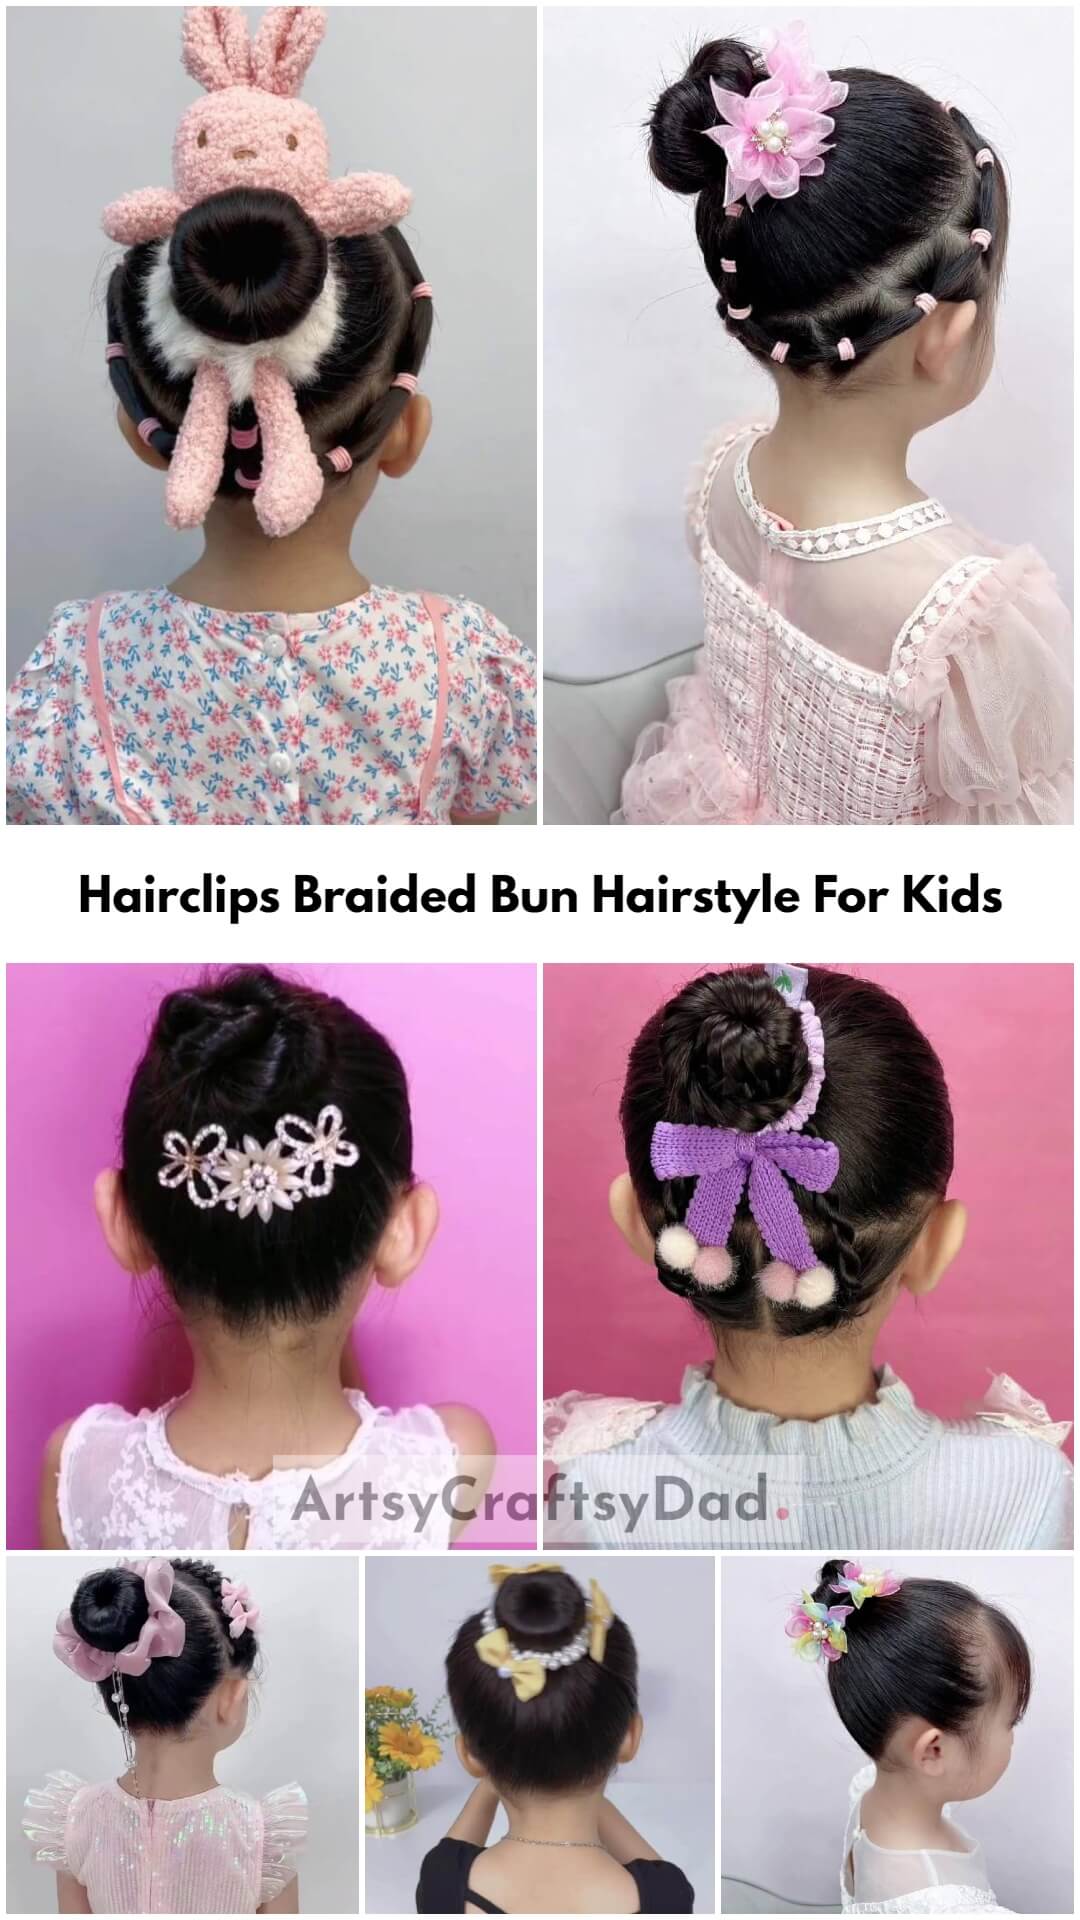 Adorable Hairclips Braided Bun Hairstyle For Kids